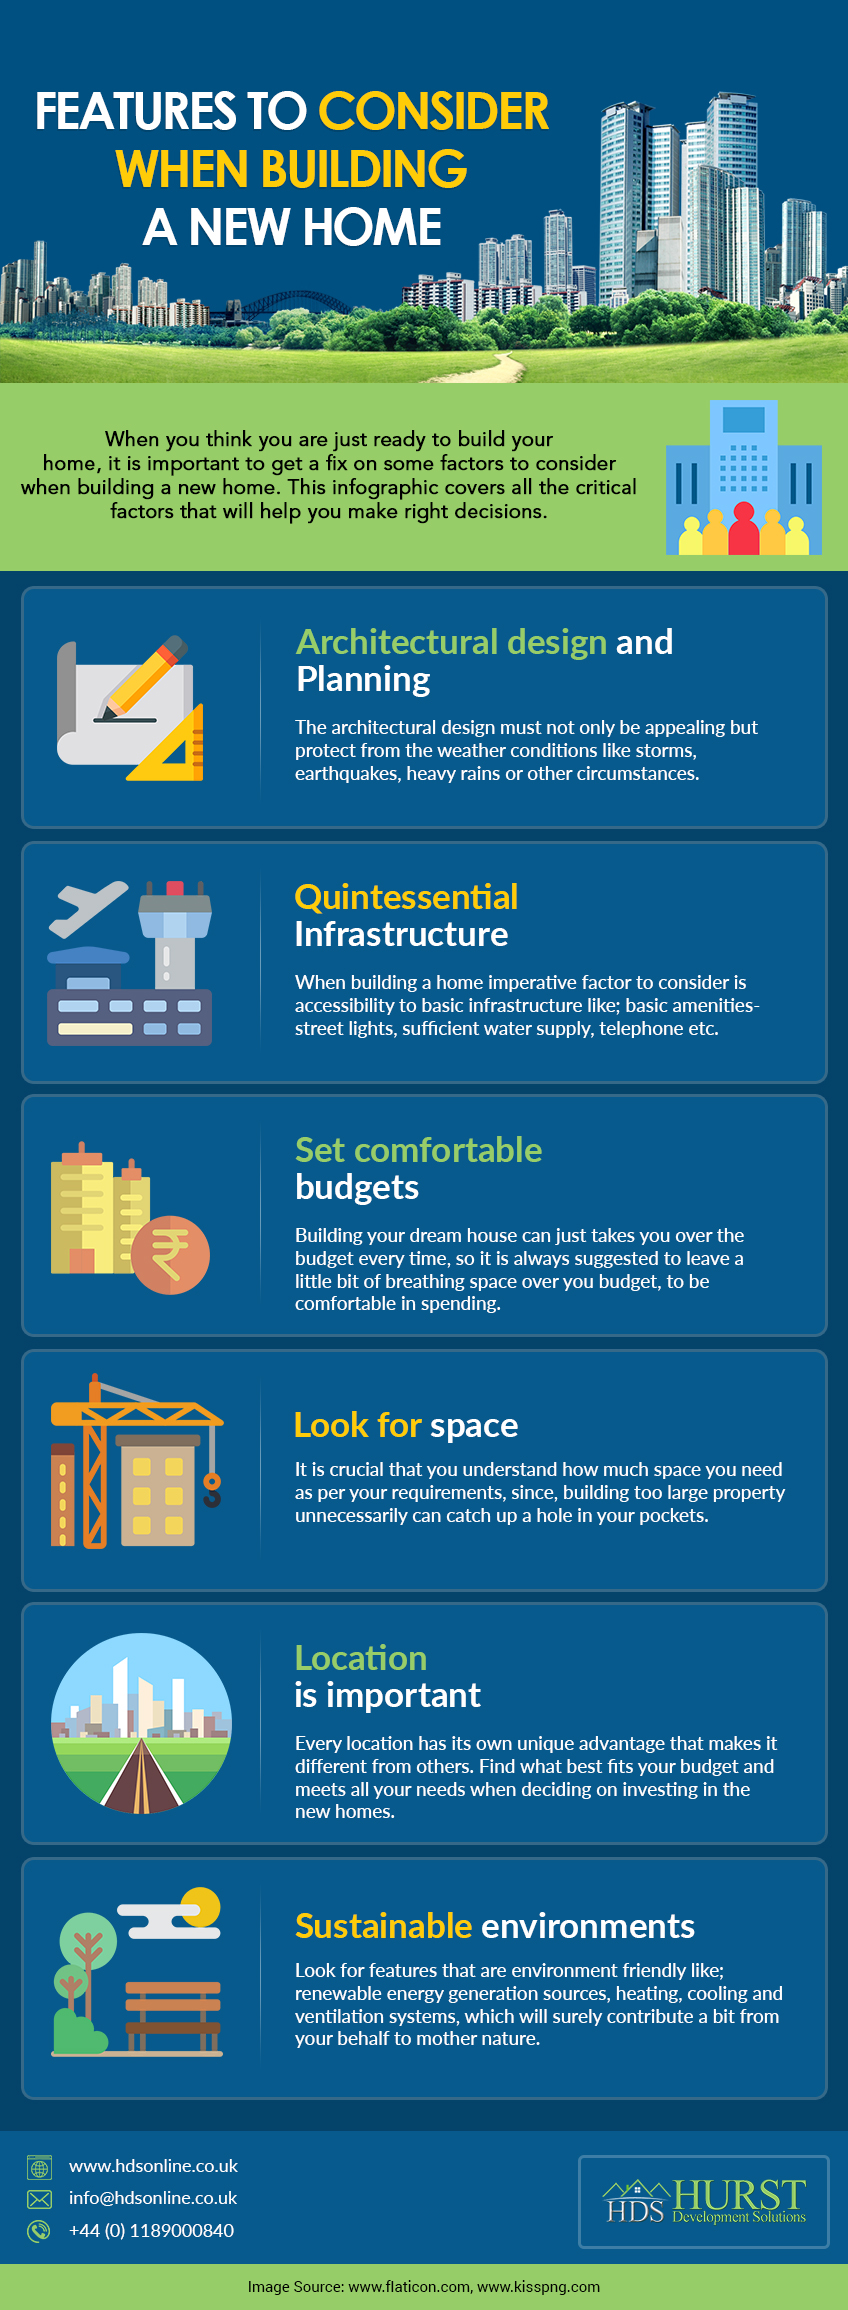 Features to Consider When Building a New Home [Infographic]